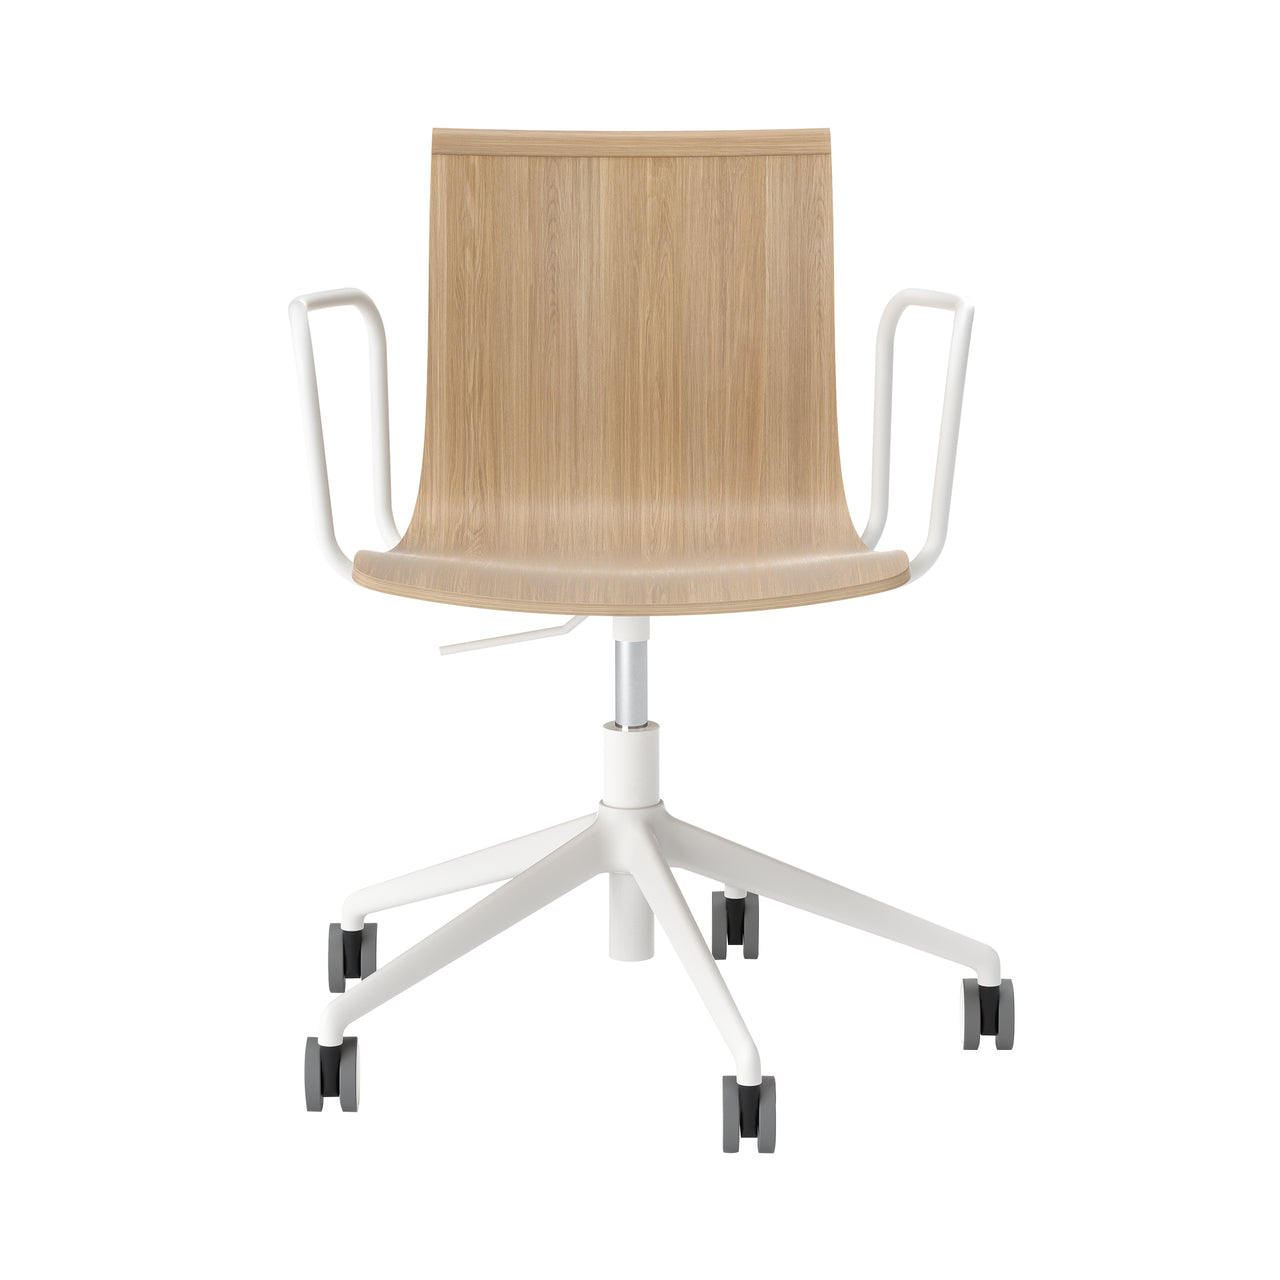 Serif Chair: 5 Star Base with Armrests + White + Natural Oak